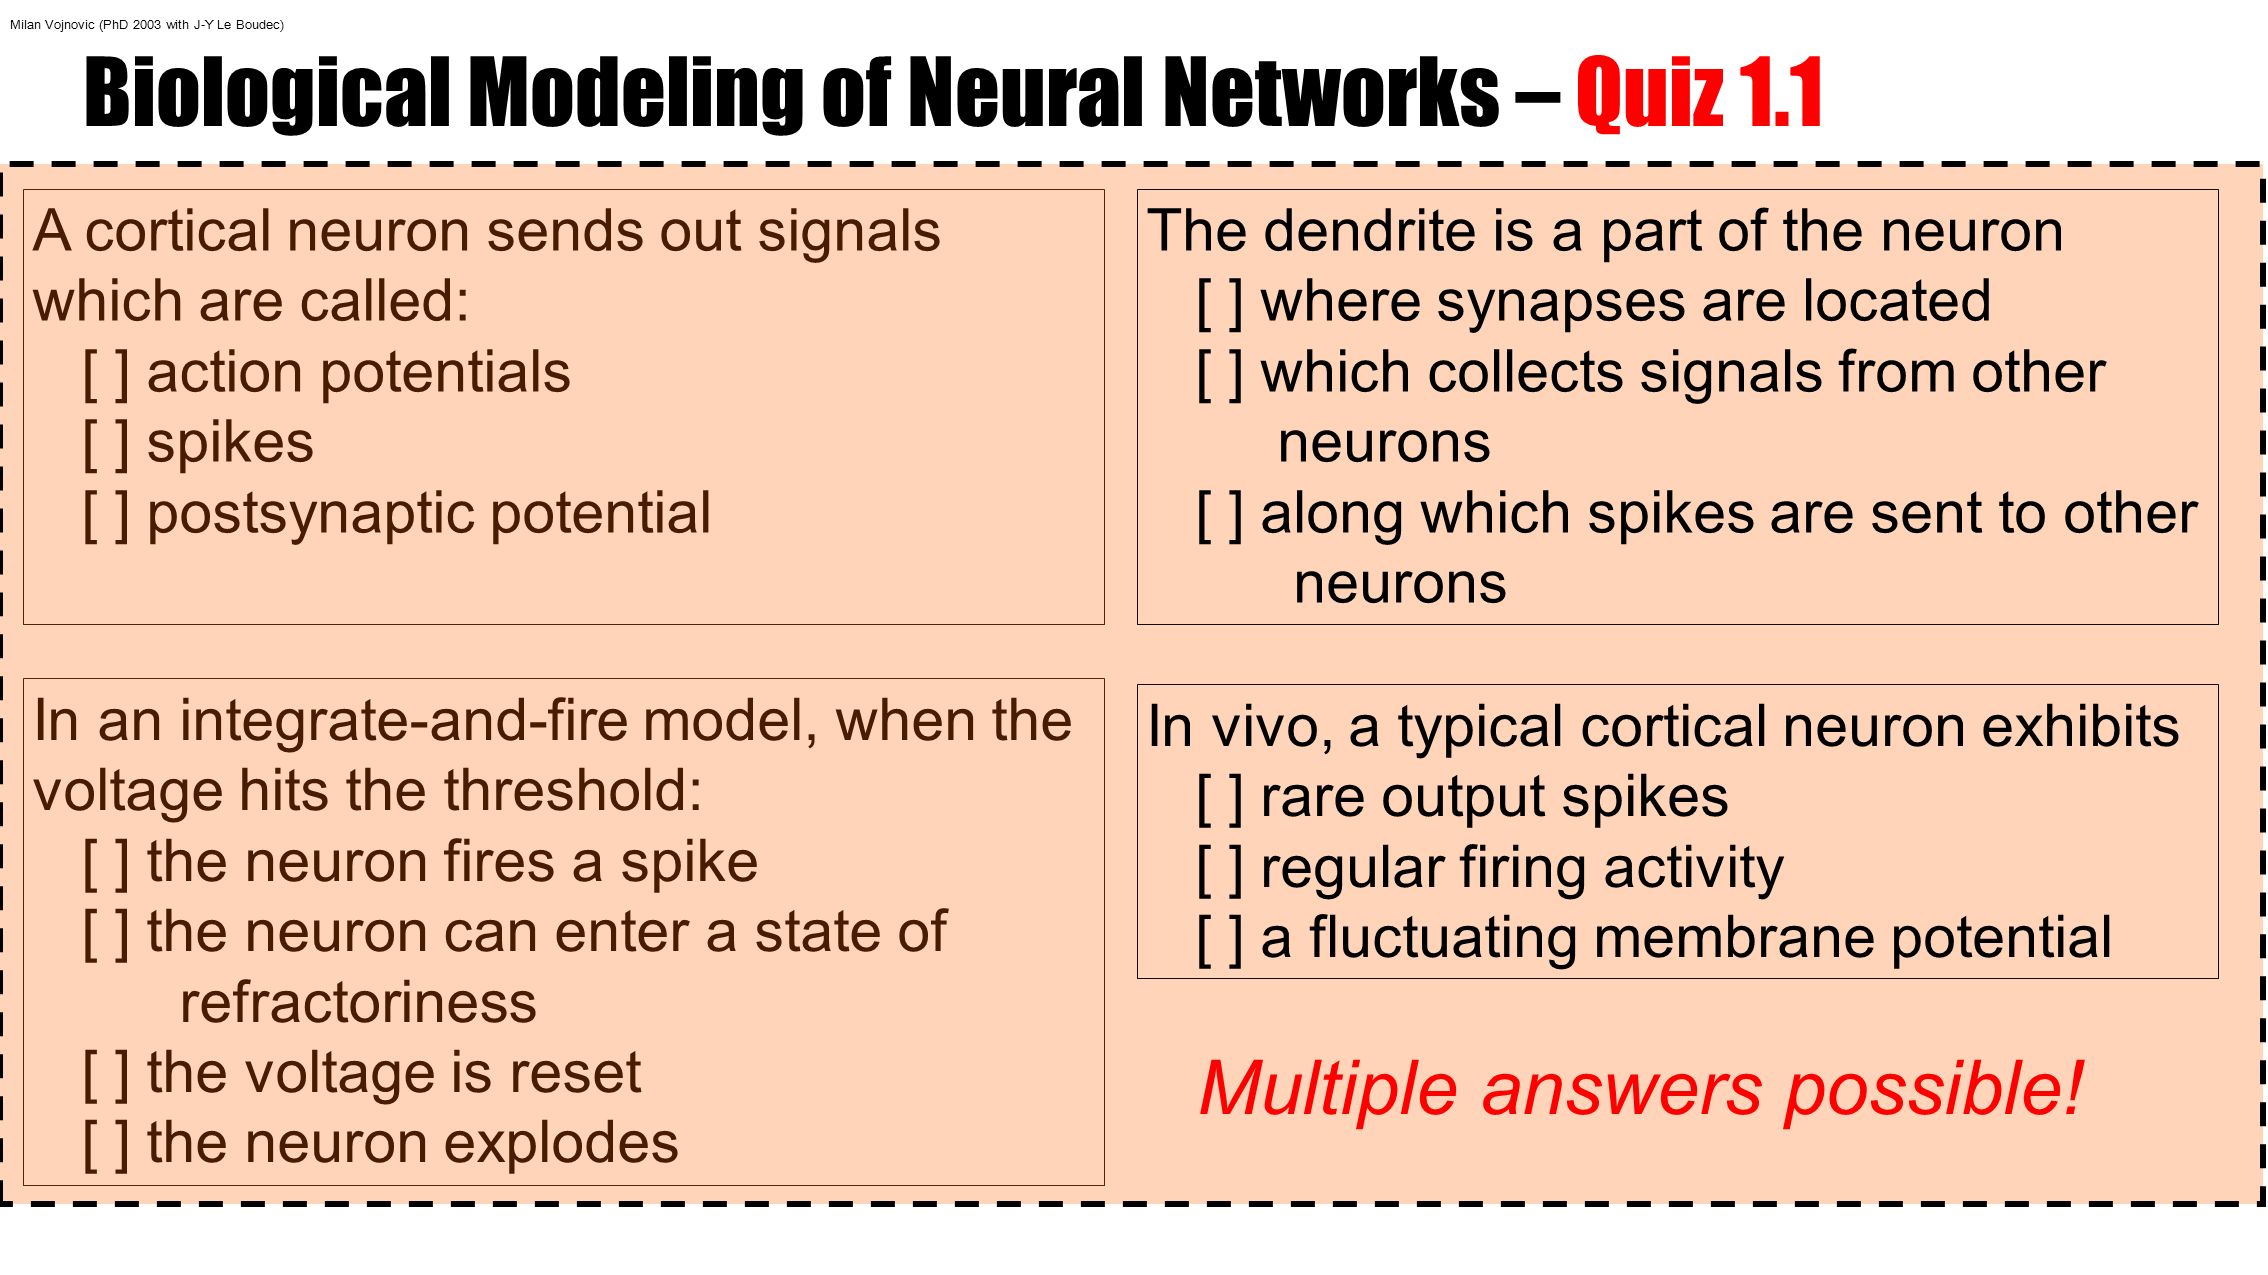 Biological Modeling of Neural Networks – Quiz 1.1 A cortical neuron sends out signals which are called: [ ] action potentials [ ] spikes [ ] postsynaptic potential In an integrate-and-fire model, when the voltage hits the threshold: [ ] the neuron fires a spike [ ] the neuron can enter a state of refractoriness [ ] the voltage is reset [ ] the neuron explodes The dendrite is a part of the neuron [ ] where synapses are located [ ] which collects signals from other neurons [ ] along which spikes are sent to other neurons In vivo, a typical cortical neuron exhibits [ ] rare output spikes [ ] regular firing activity [ ] a fluctuating membrane potential Multiple answers possible.